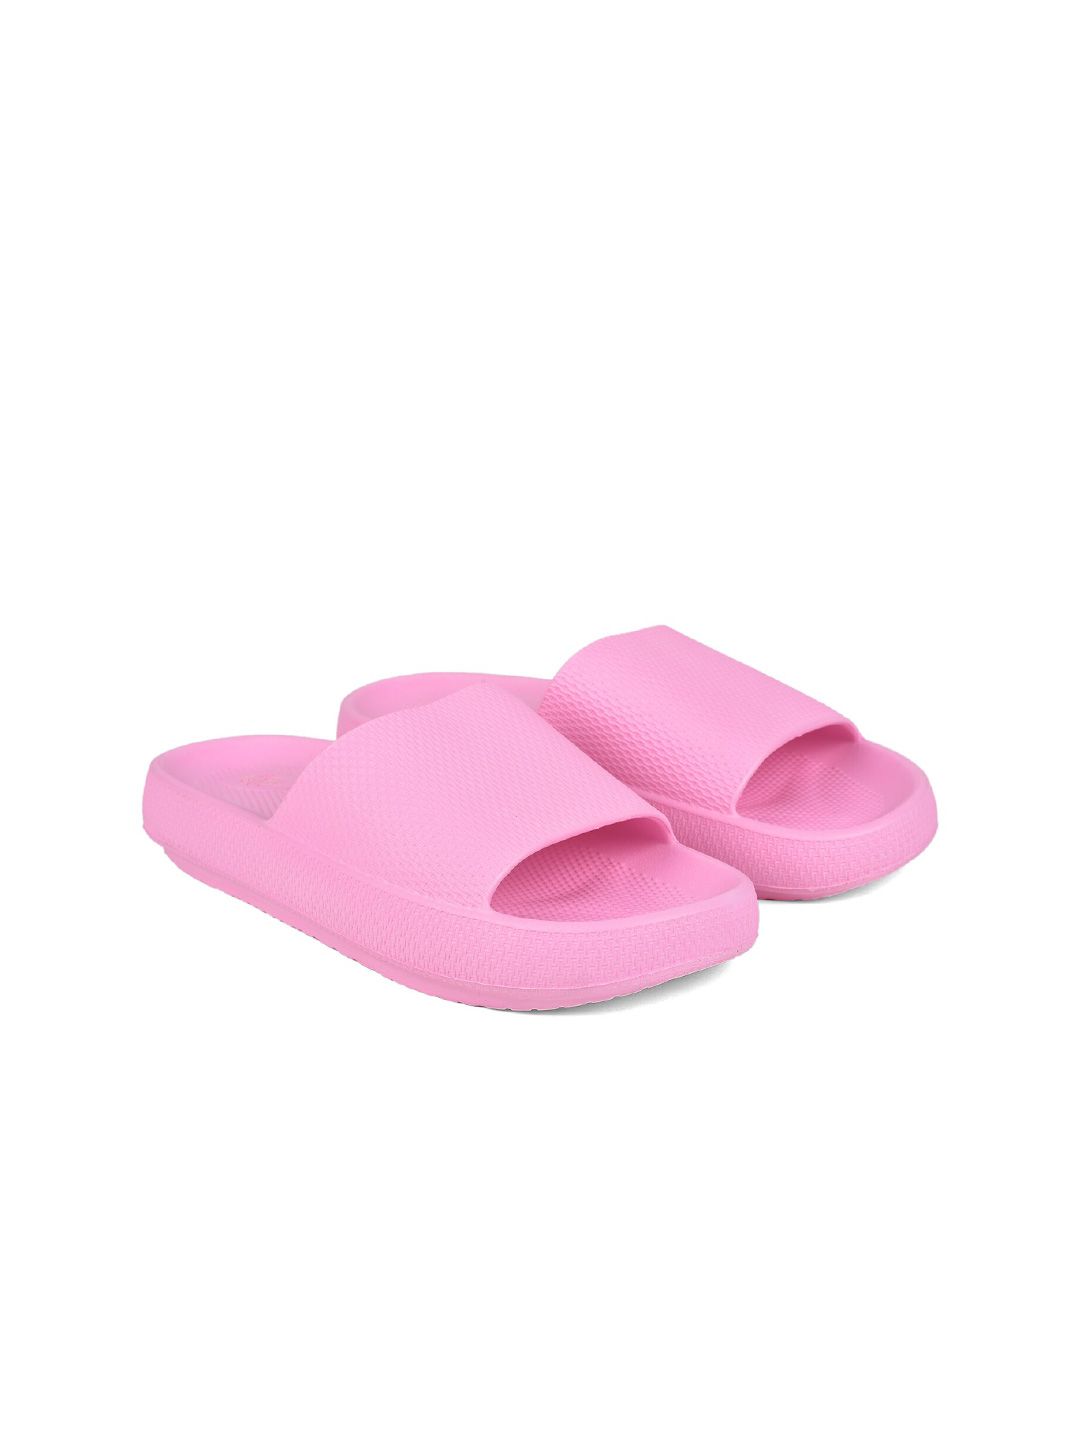 Liberty Women Pink Rubber Sliders Price in India